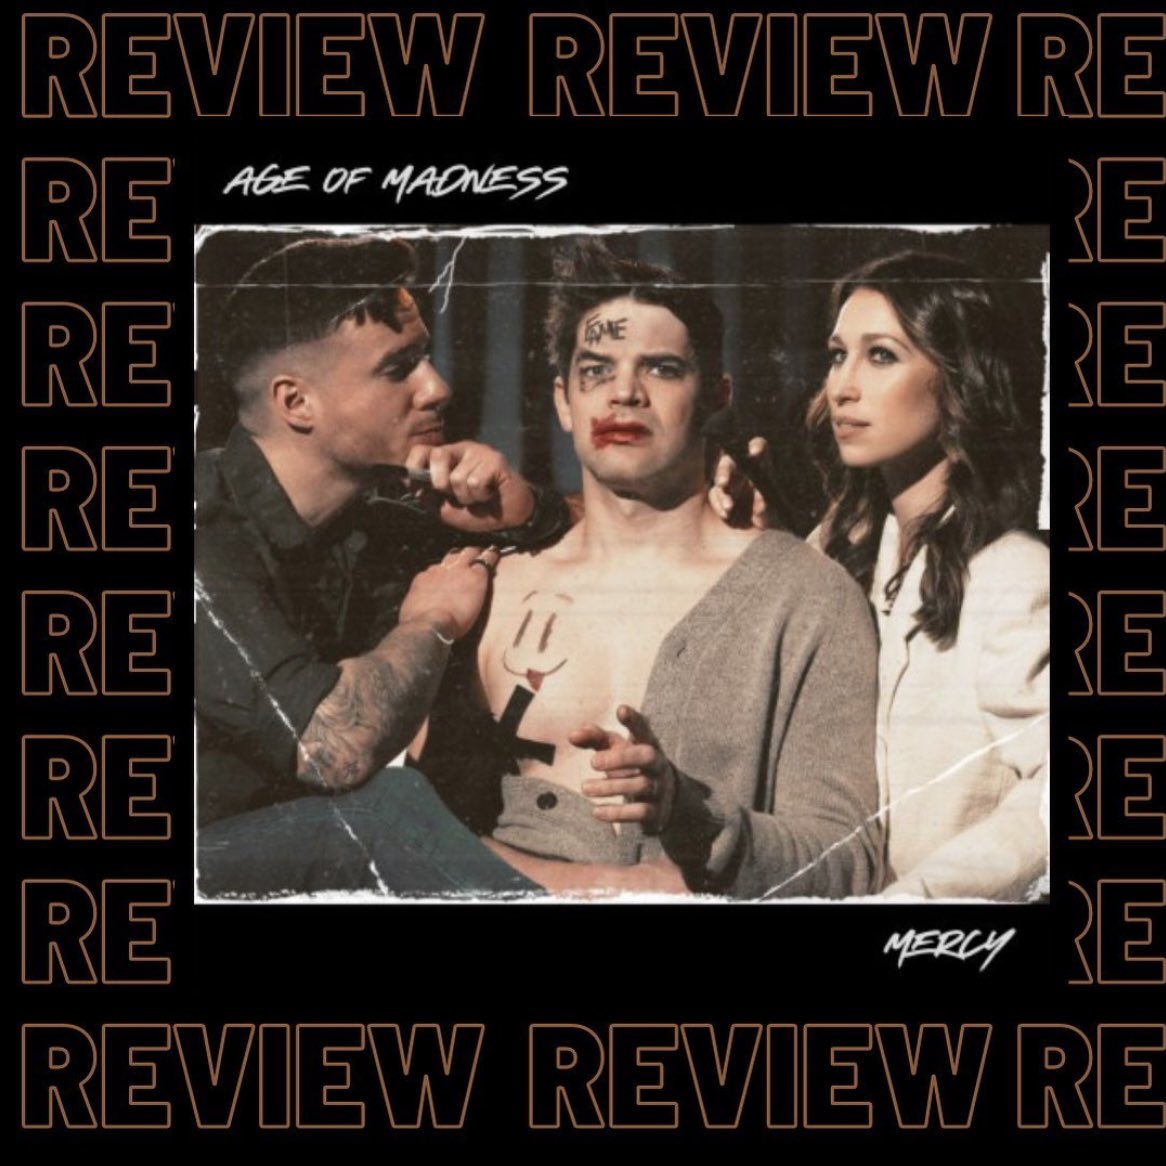 .@_ElyKing has released her review of @ageofmadnessband’s debut album, ‘Mercy.’ She has seen their second ever concert and first as full band in the UK (November 13, 2022). She said, “It’s insane to see them grow and I am endlessly proud of these three.” elyking.uk/2023/06/13/alb…